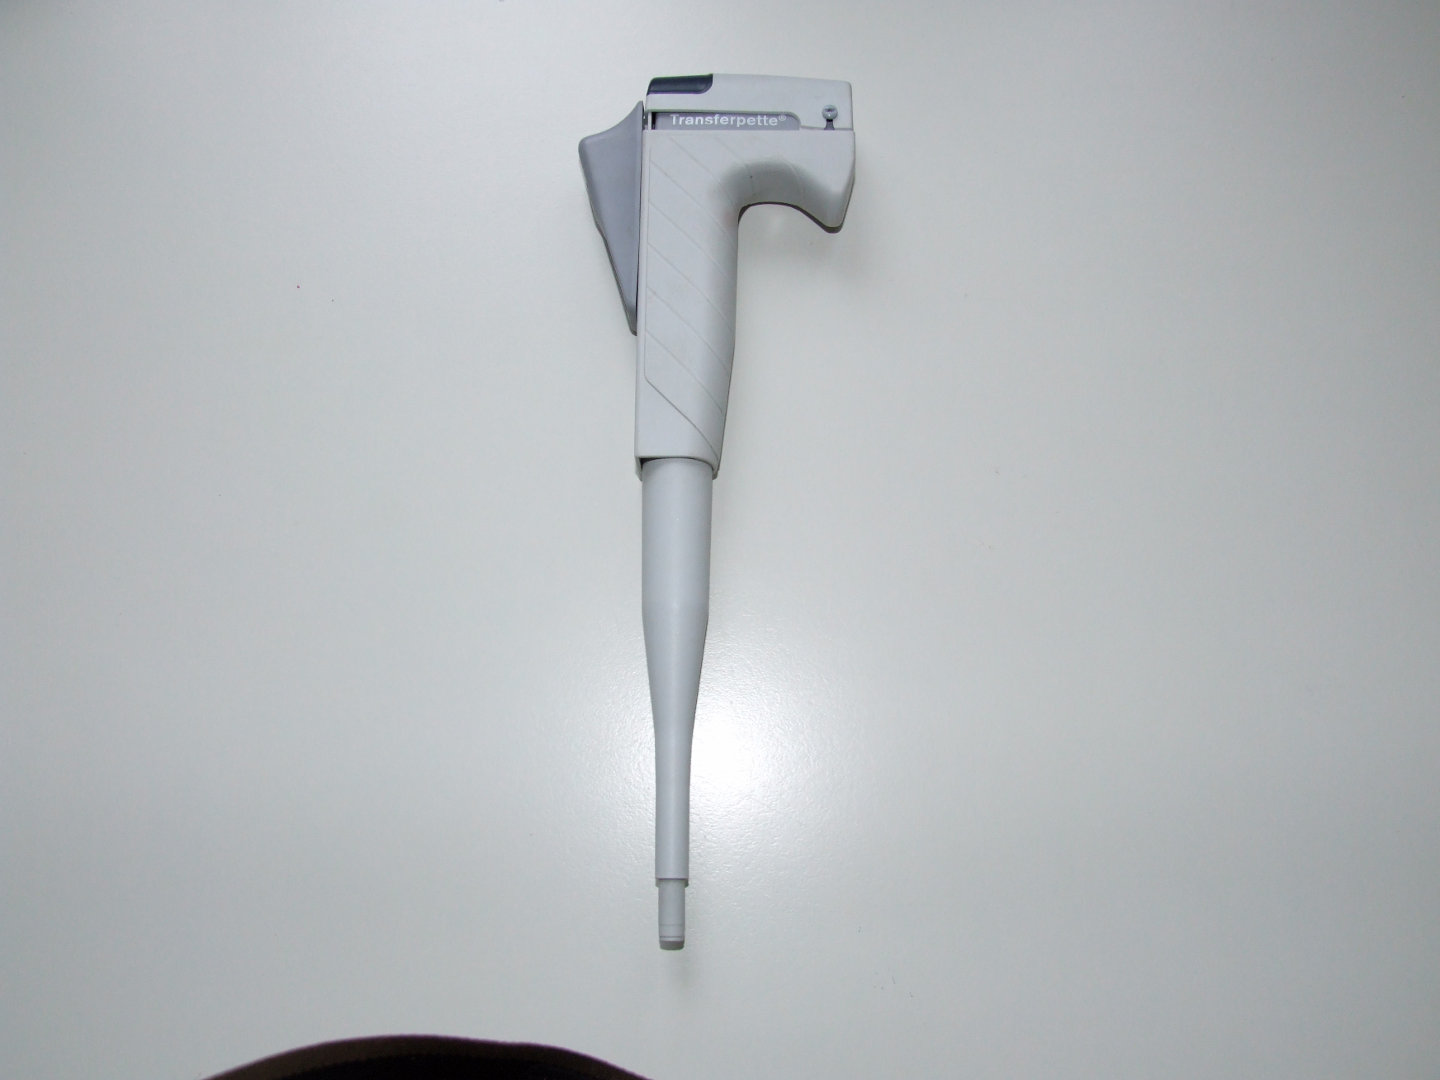 Mechanical pipette 100-1000 ml